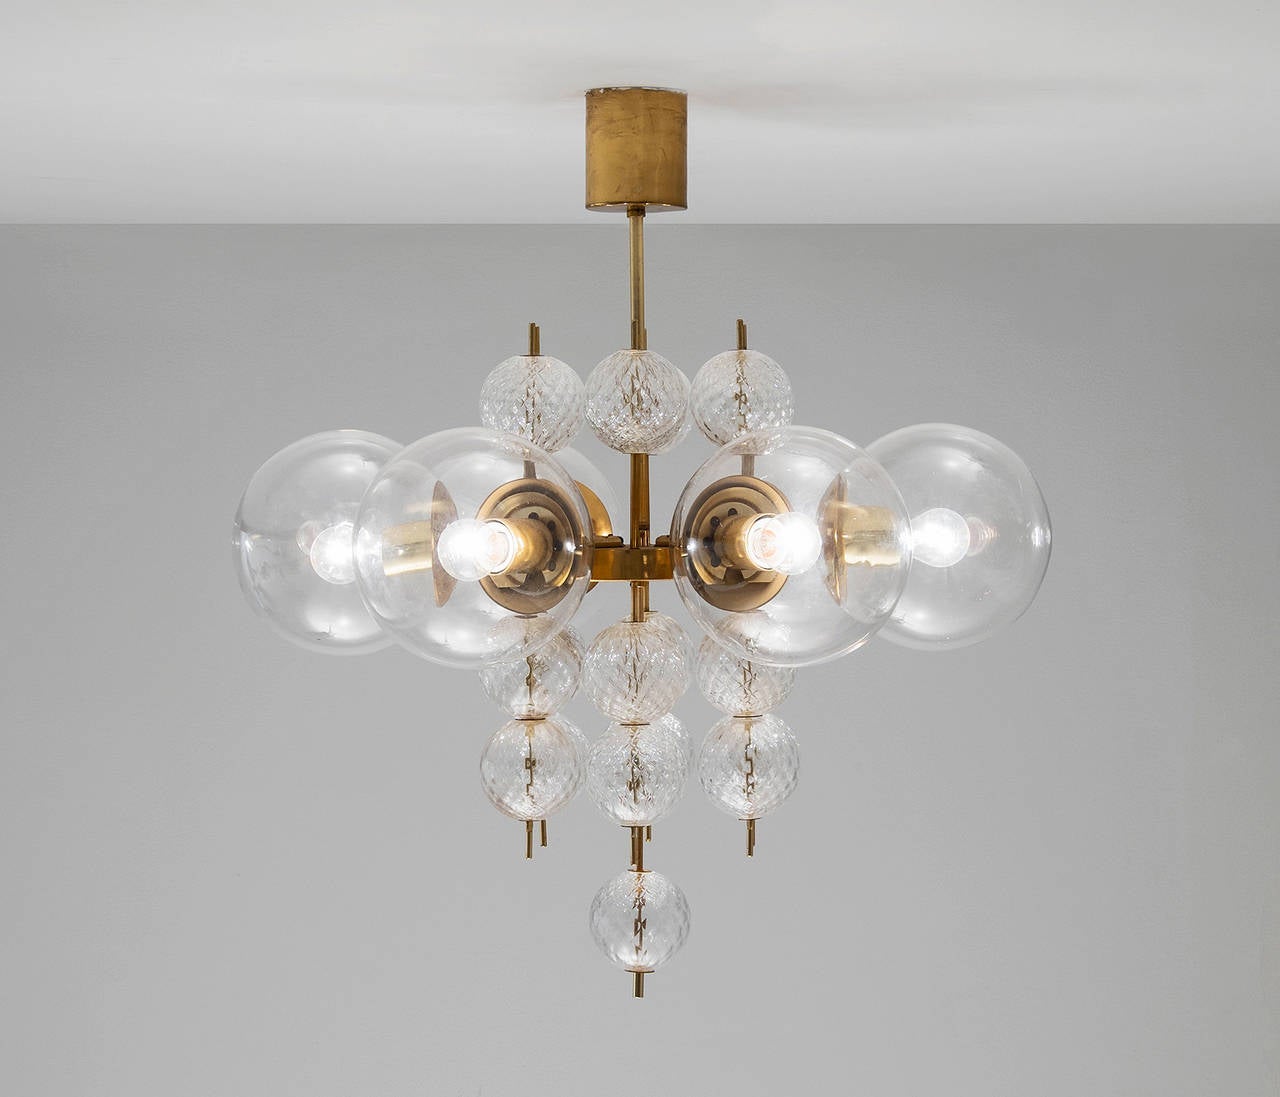 Chandelier, brass and glass, Europe, 1960s.

This light was found in the very south of the Czech Republic, so most likely from Austrian production seen its excellent quality with which it has been manufactured. Multiple large bulbs are dynamically